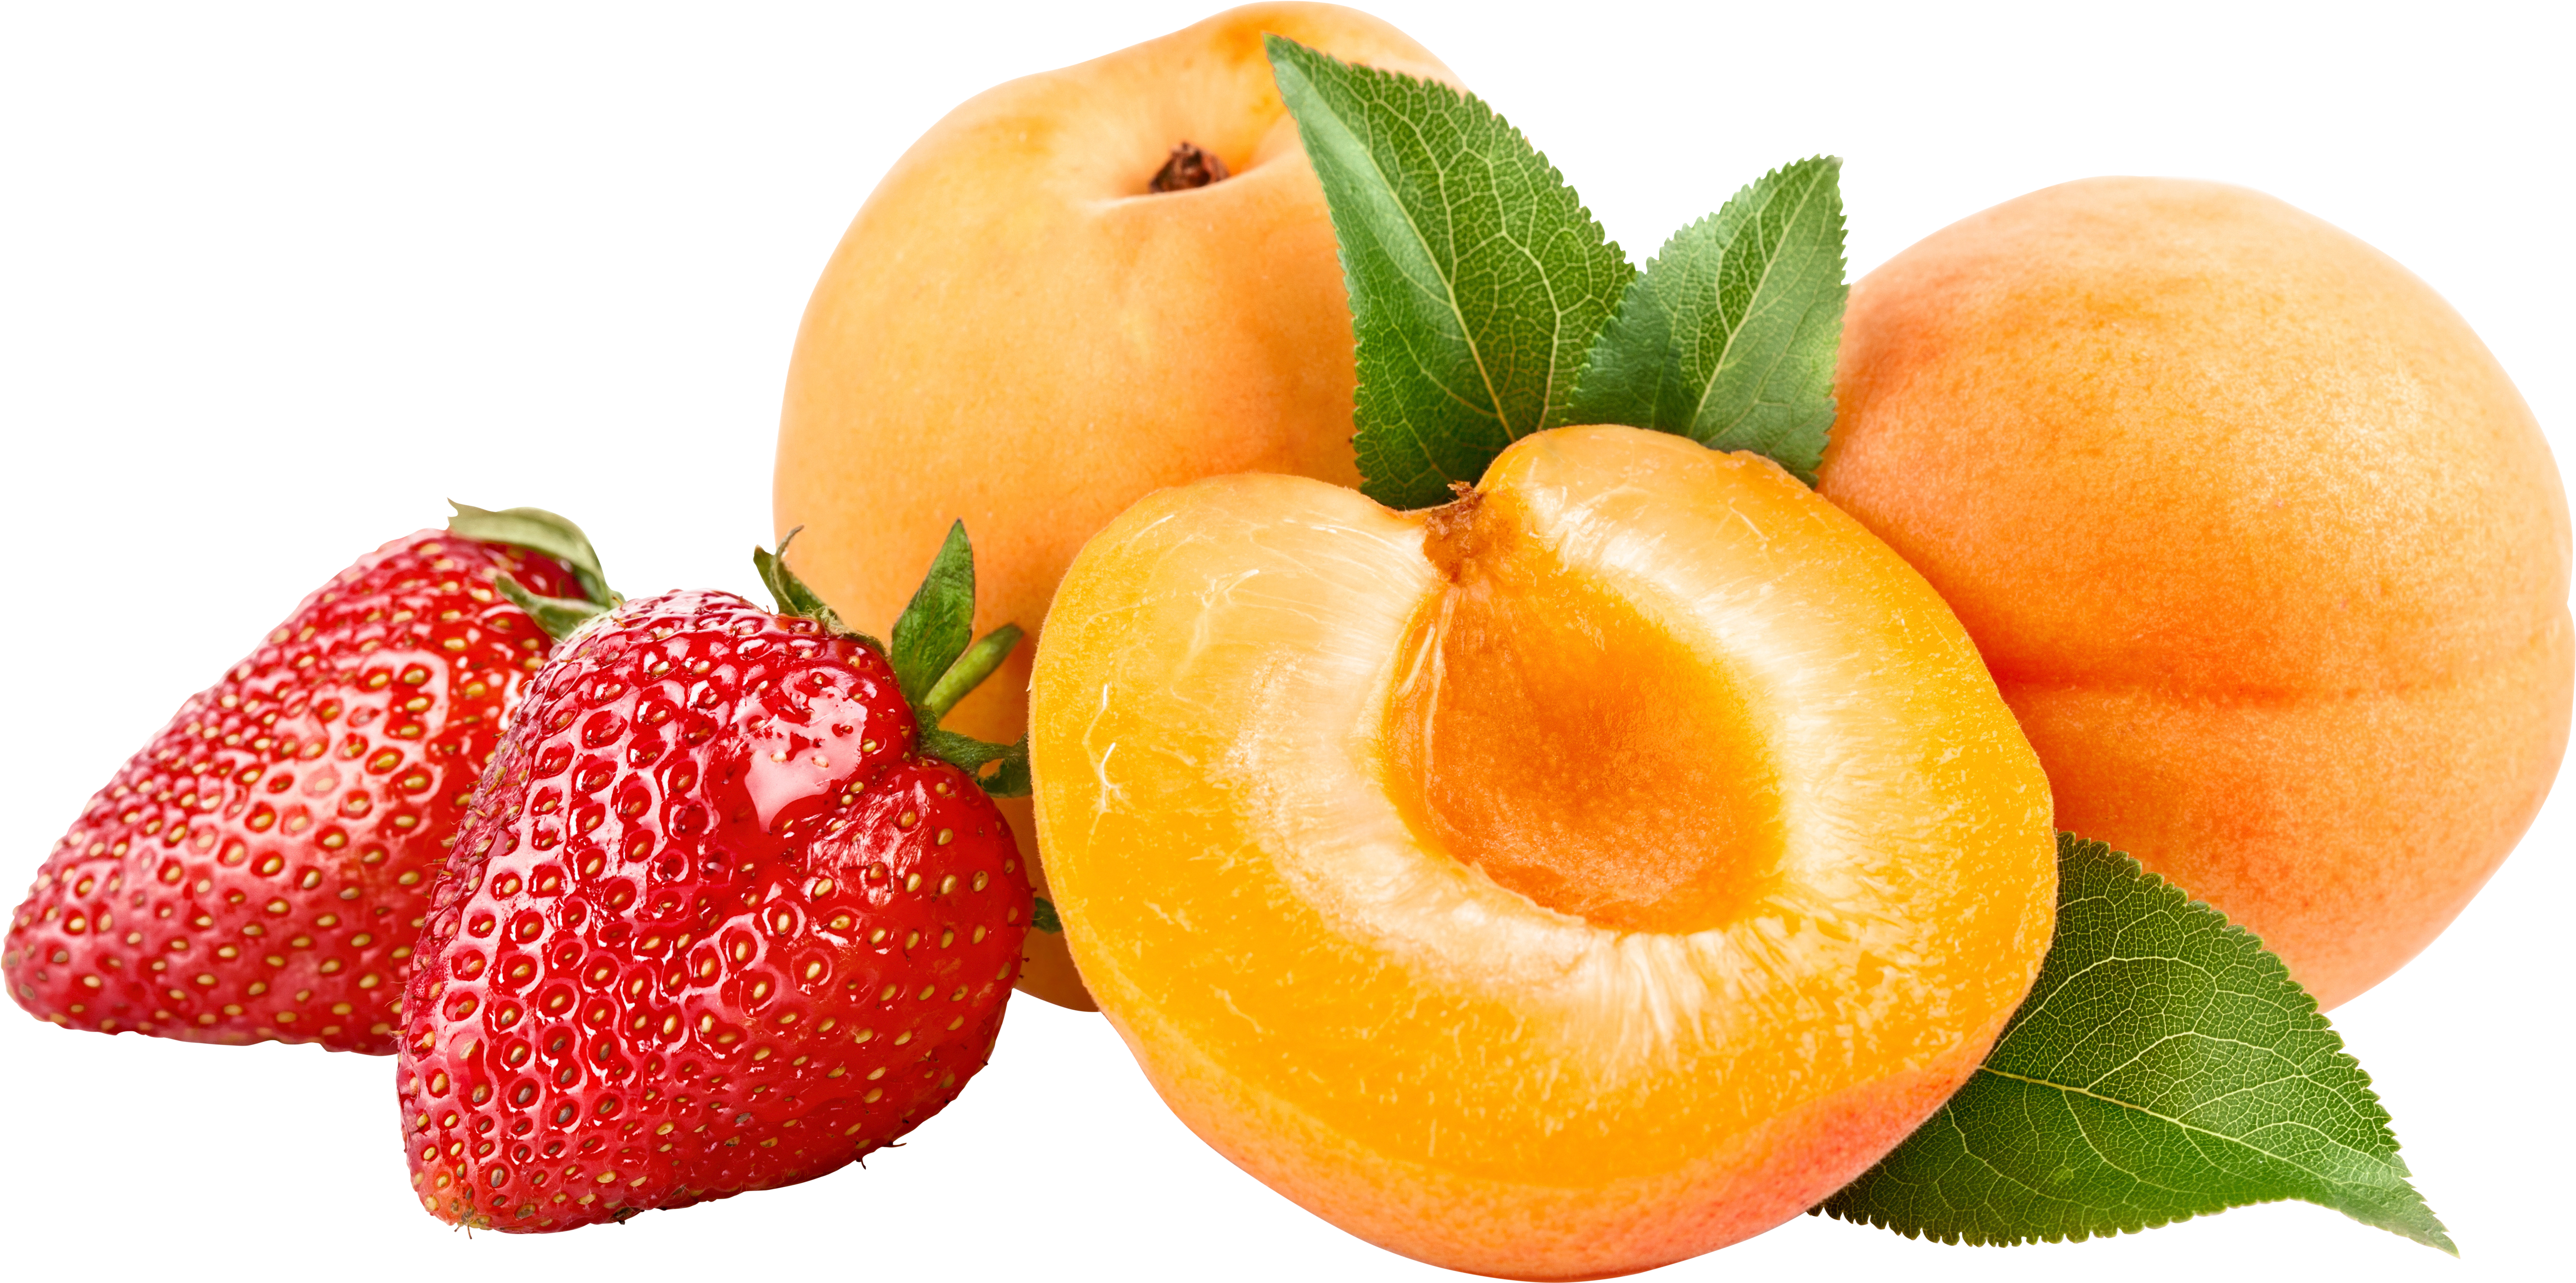 Apricots with strawberry PNG